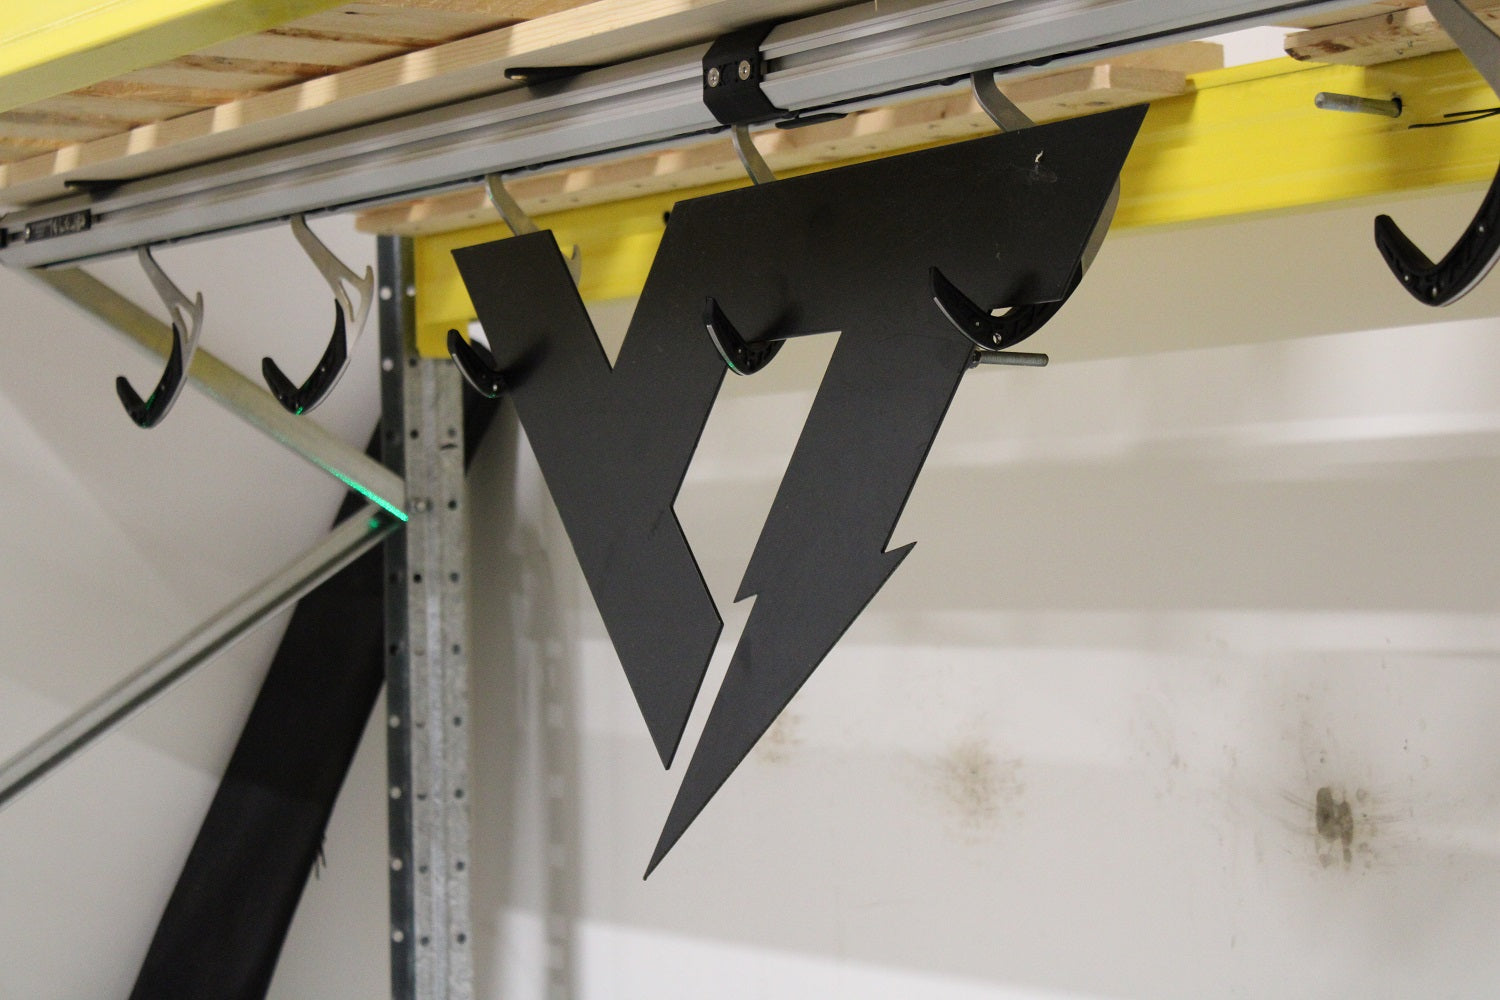 SpaceRail system can hang more than just bikes, like this logo